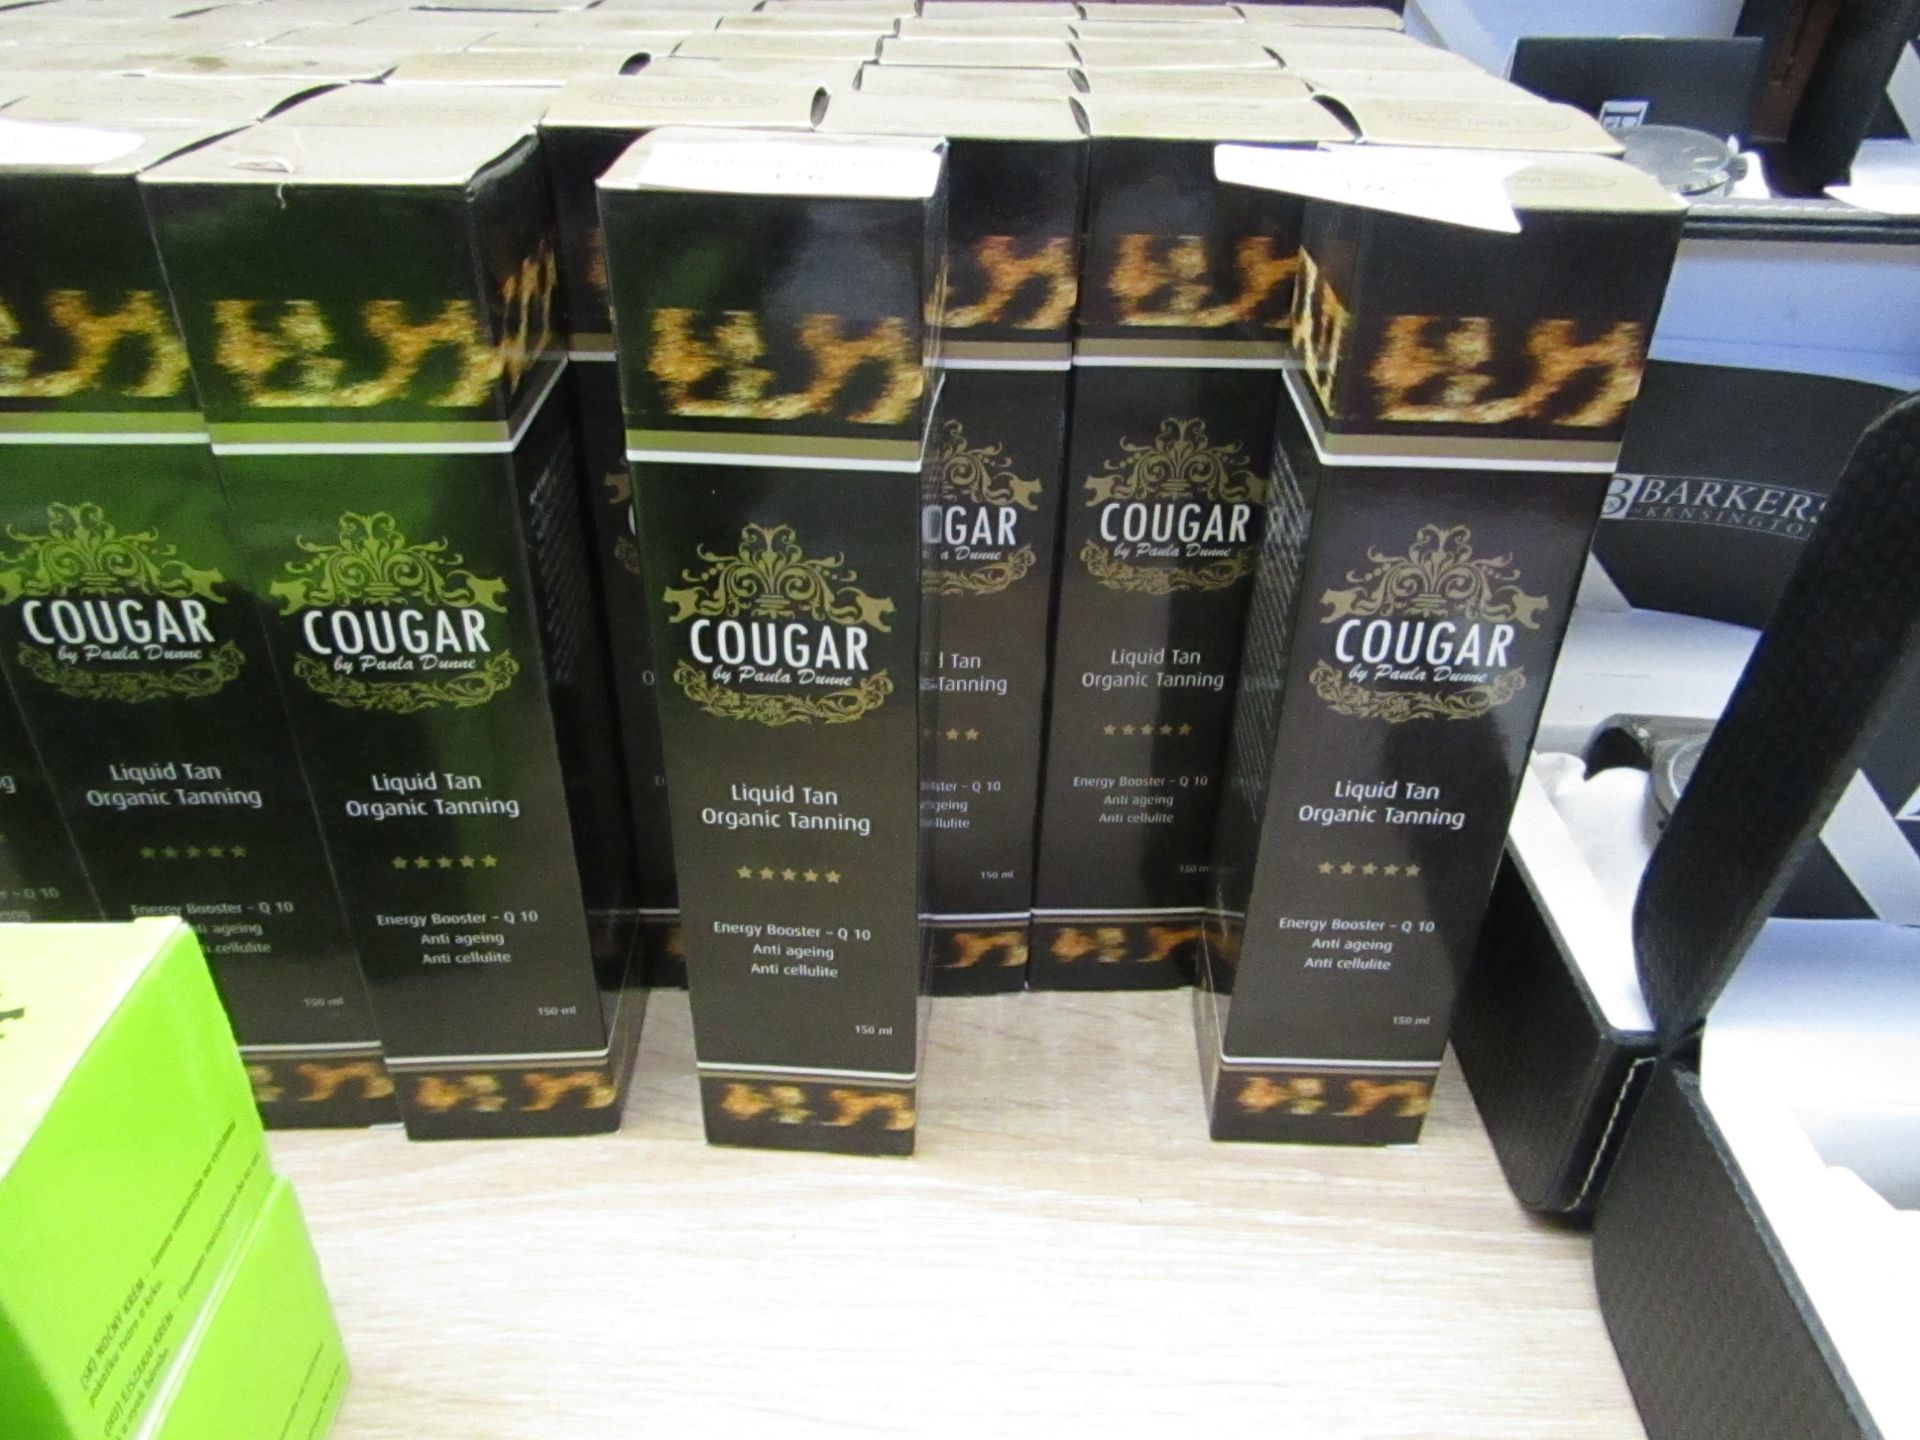 5 x 150ml canisters of Cougar organic spray tan with energy booster, Shades are Chelsea Glow & Essex